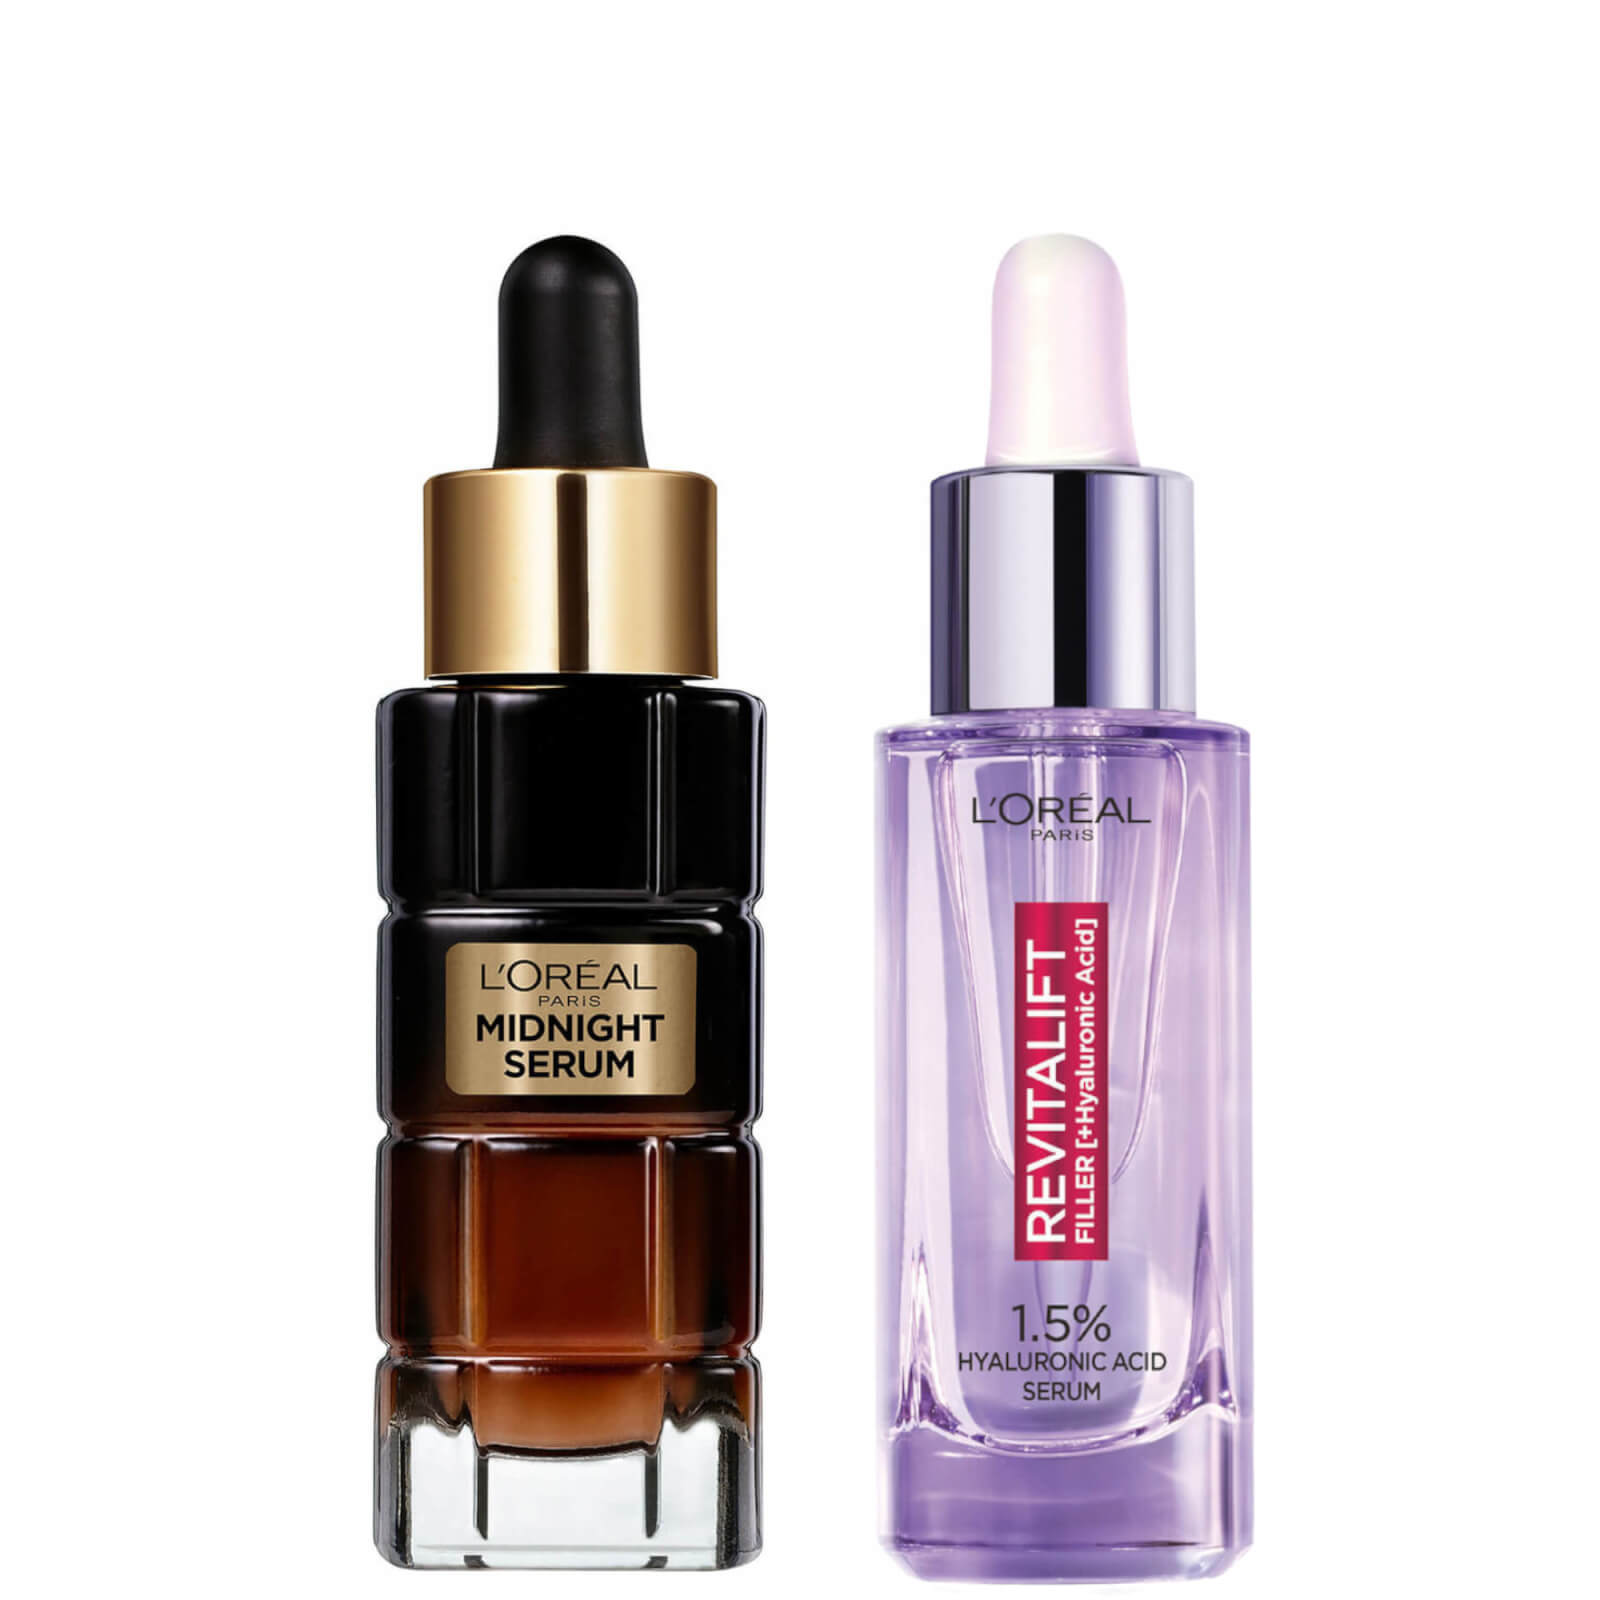 L'Oreal Paris Plump and Glow Serums Bundle with 1.5% Hyaluronic Acid, Vitamin E and Anti-Oxidants